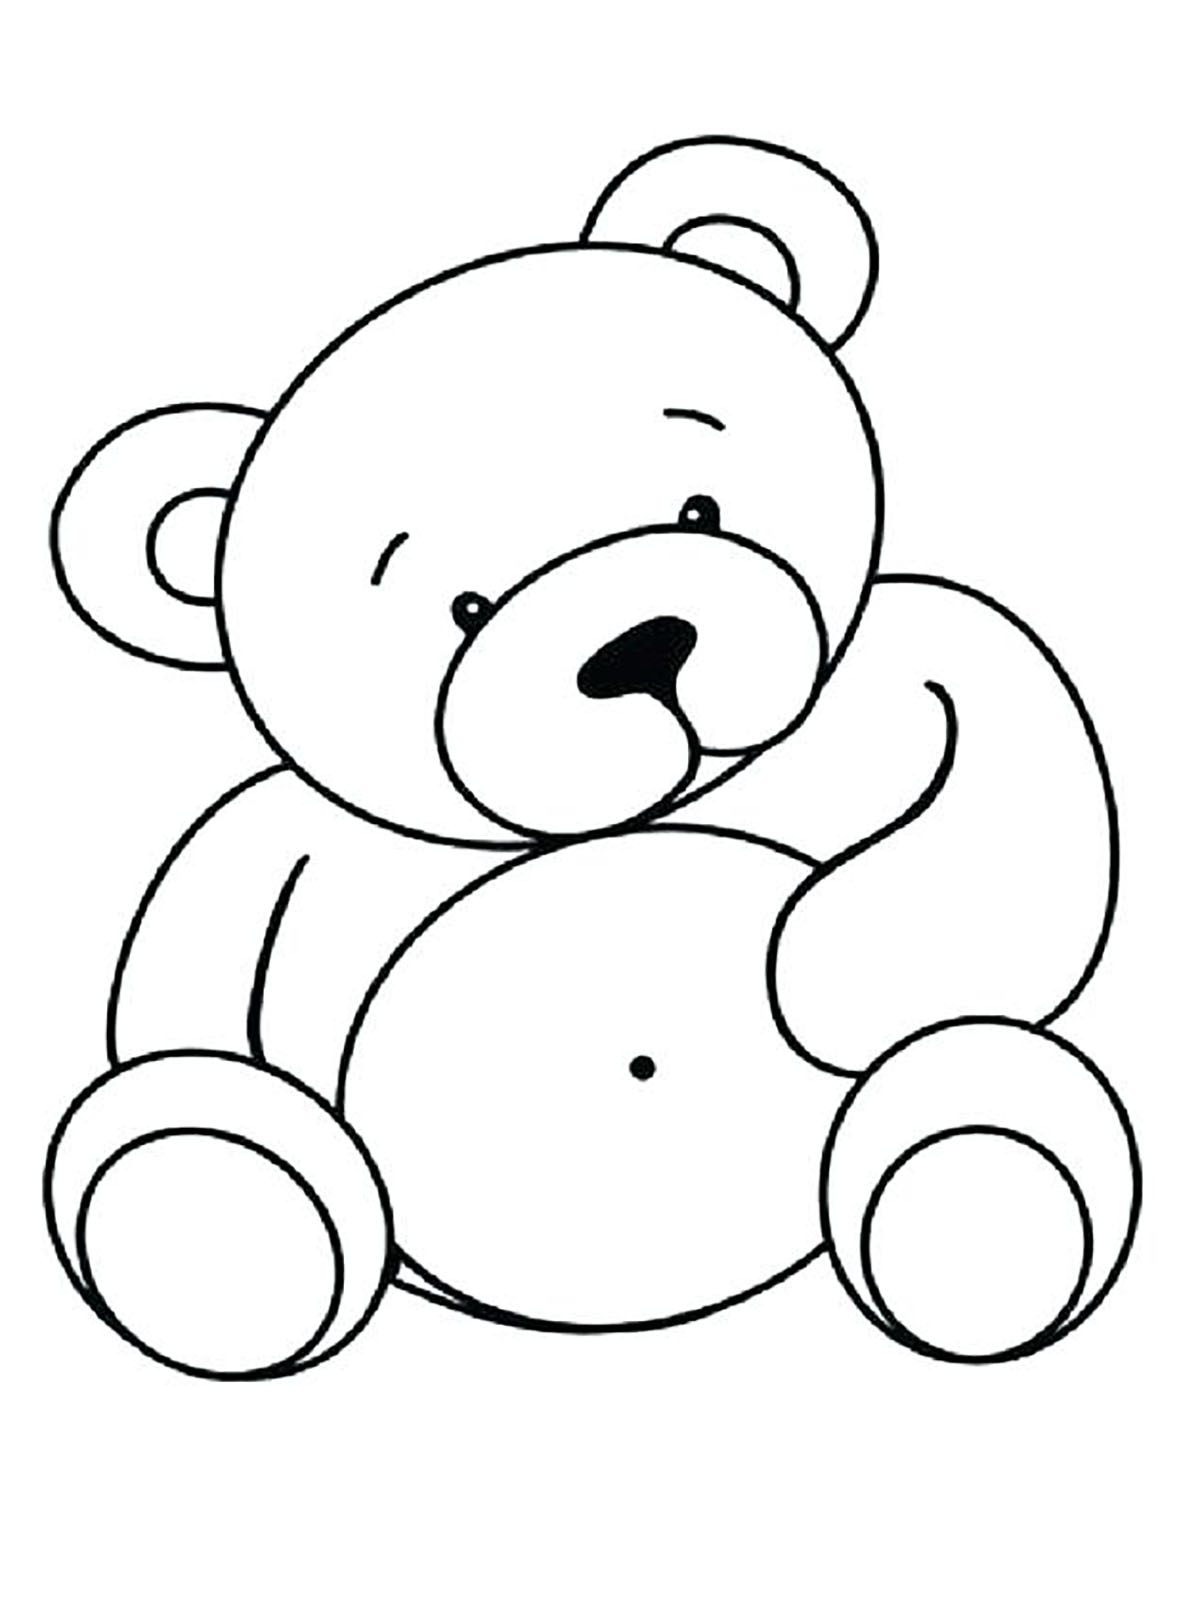 Bears to print for free - Bears Kids Coloring Pages